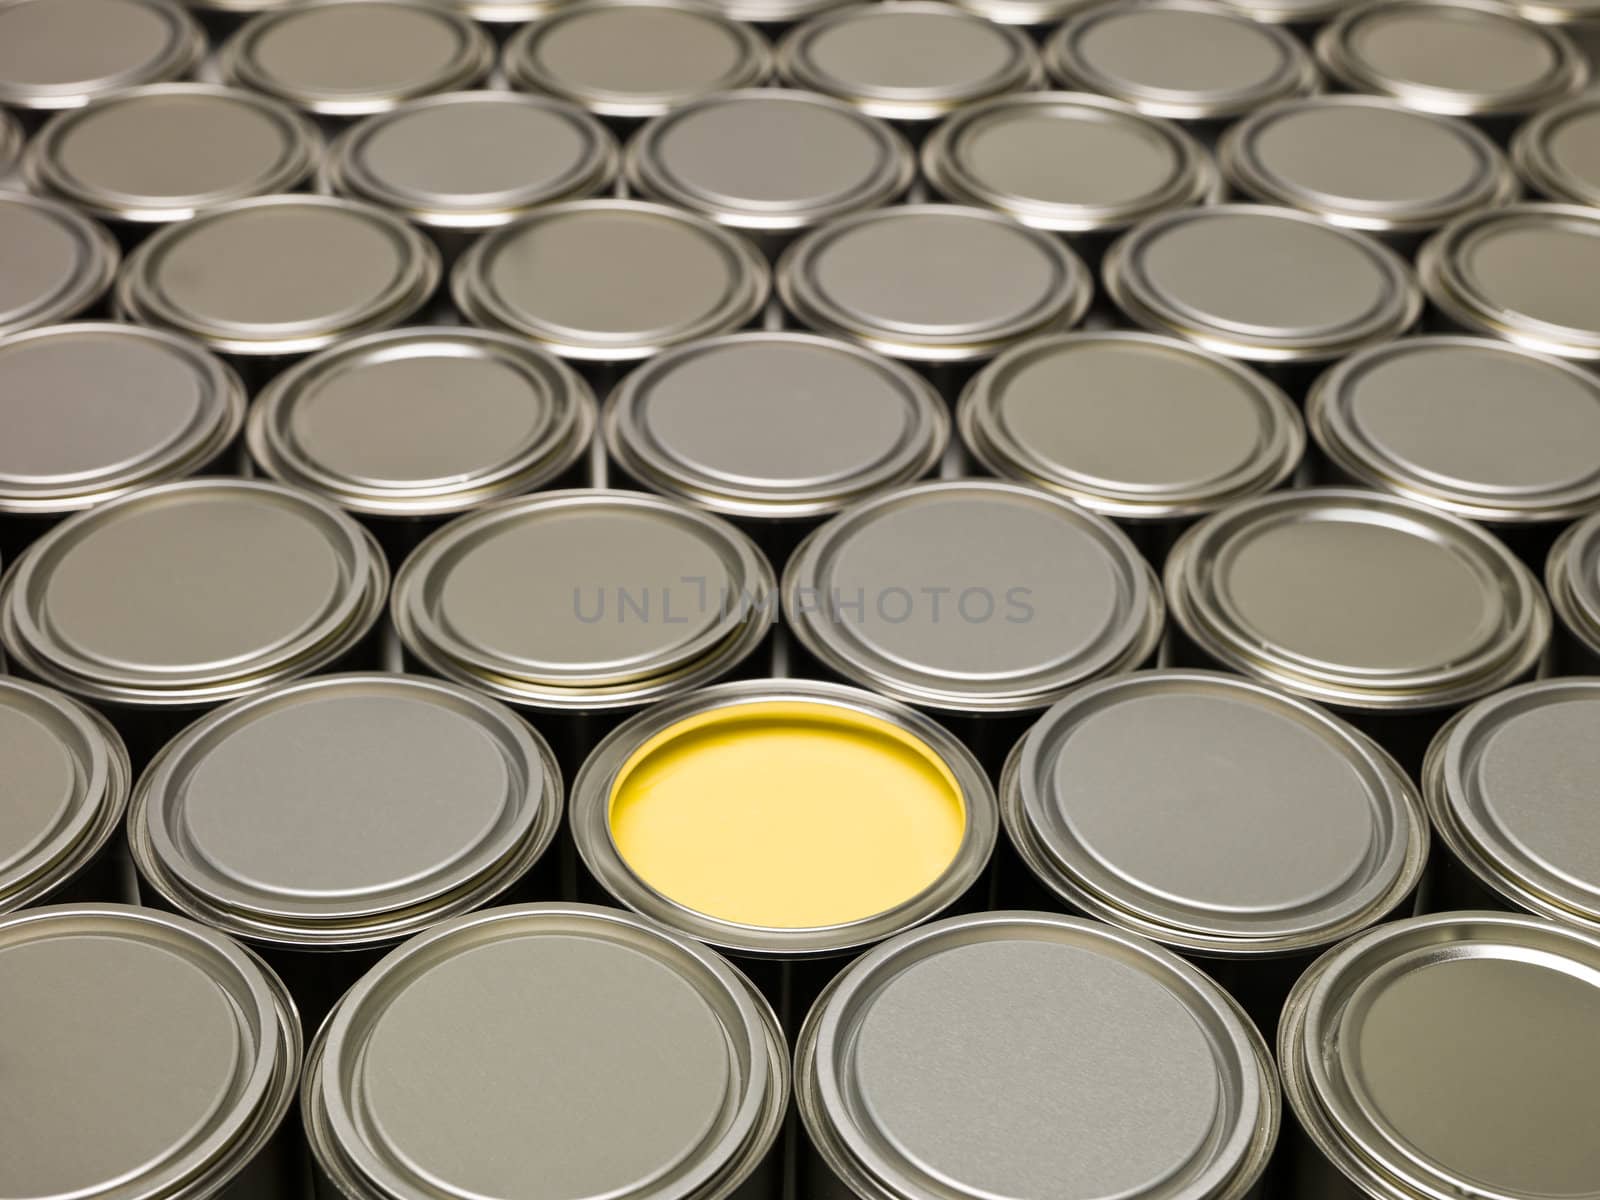 Full Frame of Paint Cans, one filled with Yellow paint